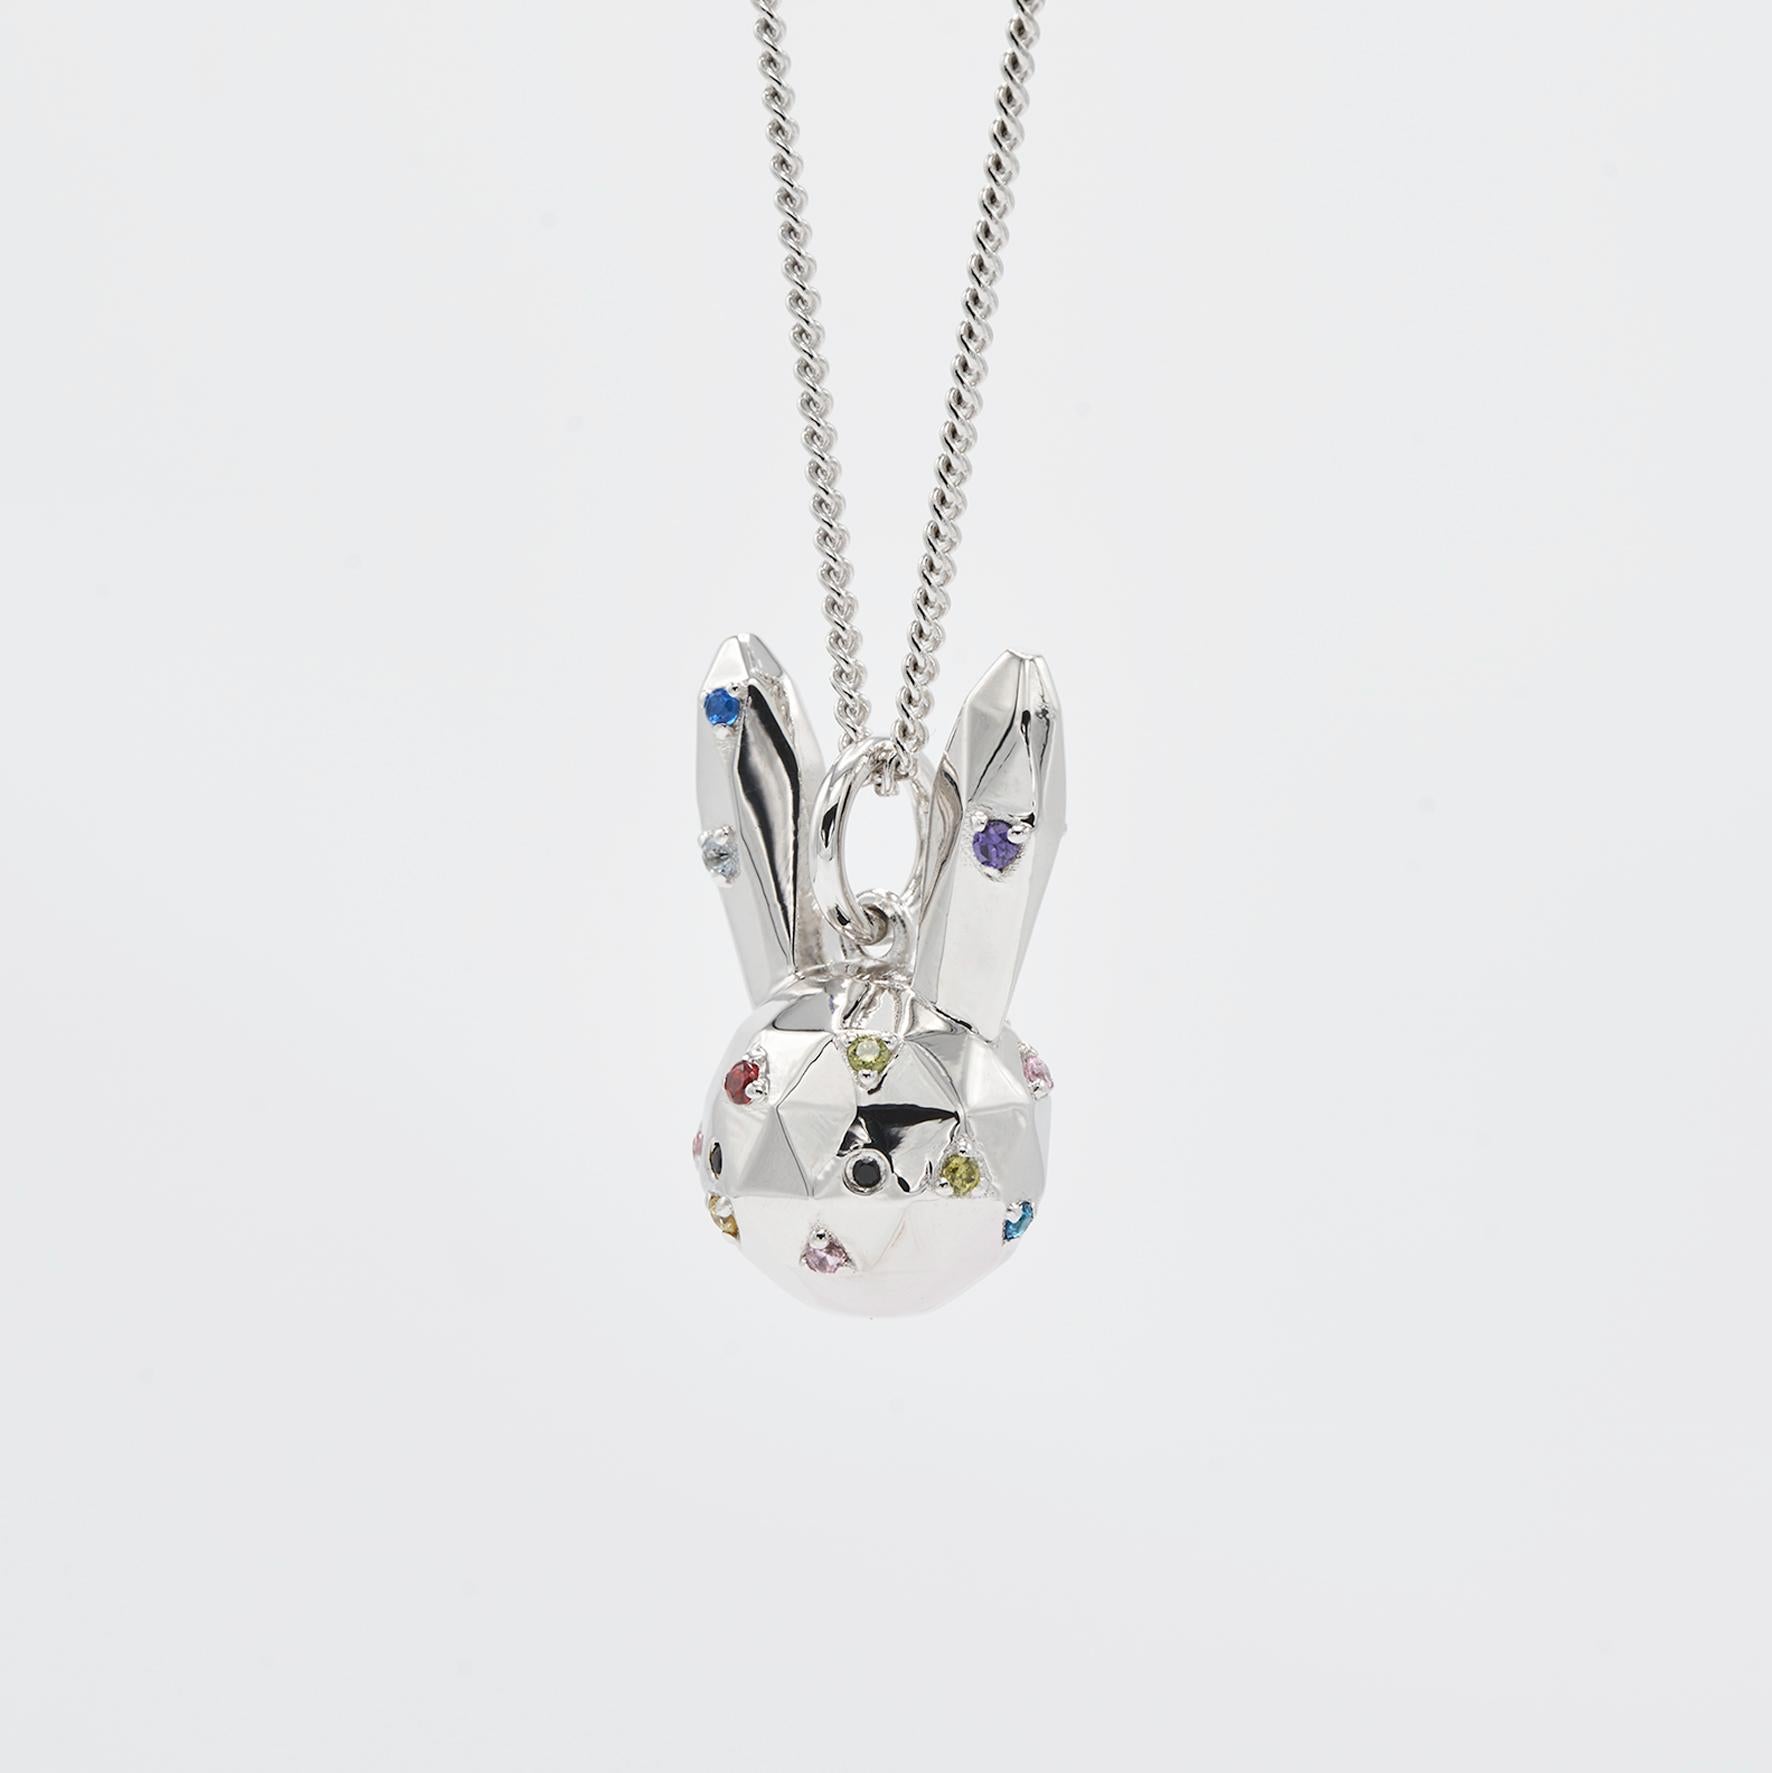 Bunny with rainbow cubic zirconia and design-cut shape.

Dimensions:
19mm x 12mm, chain 45cm + extender            
Composition: 
Sterling Silver / cubic zirconia

Sold with chain